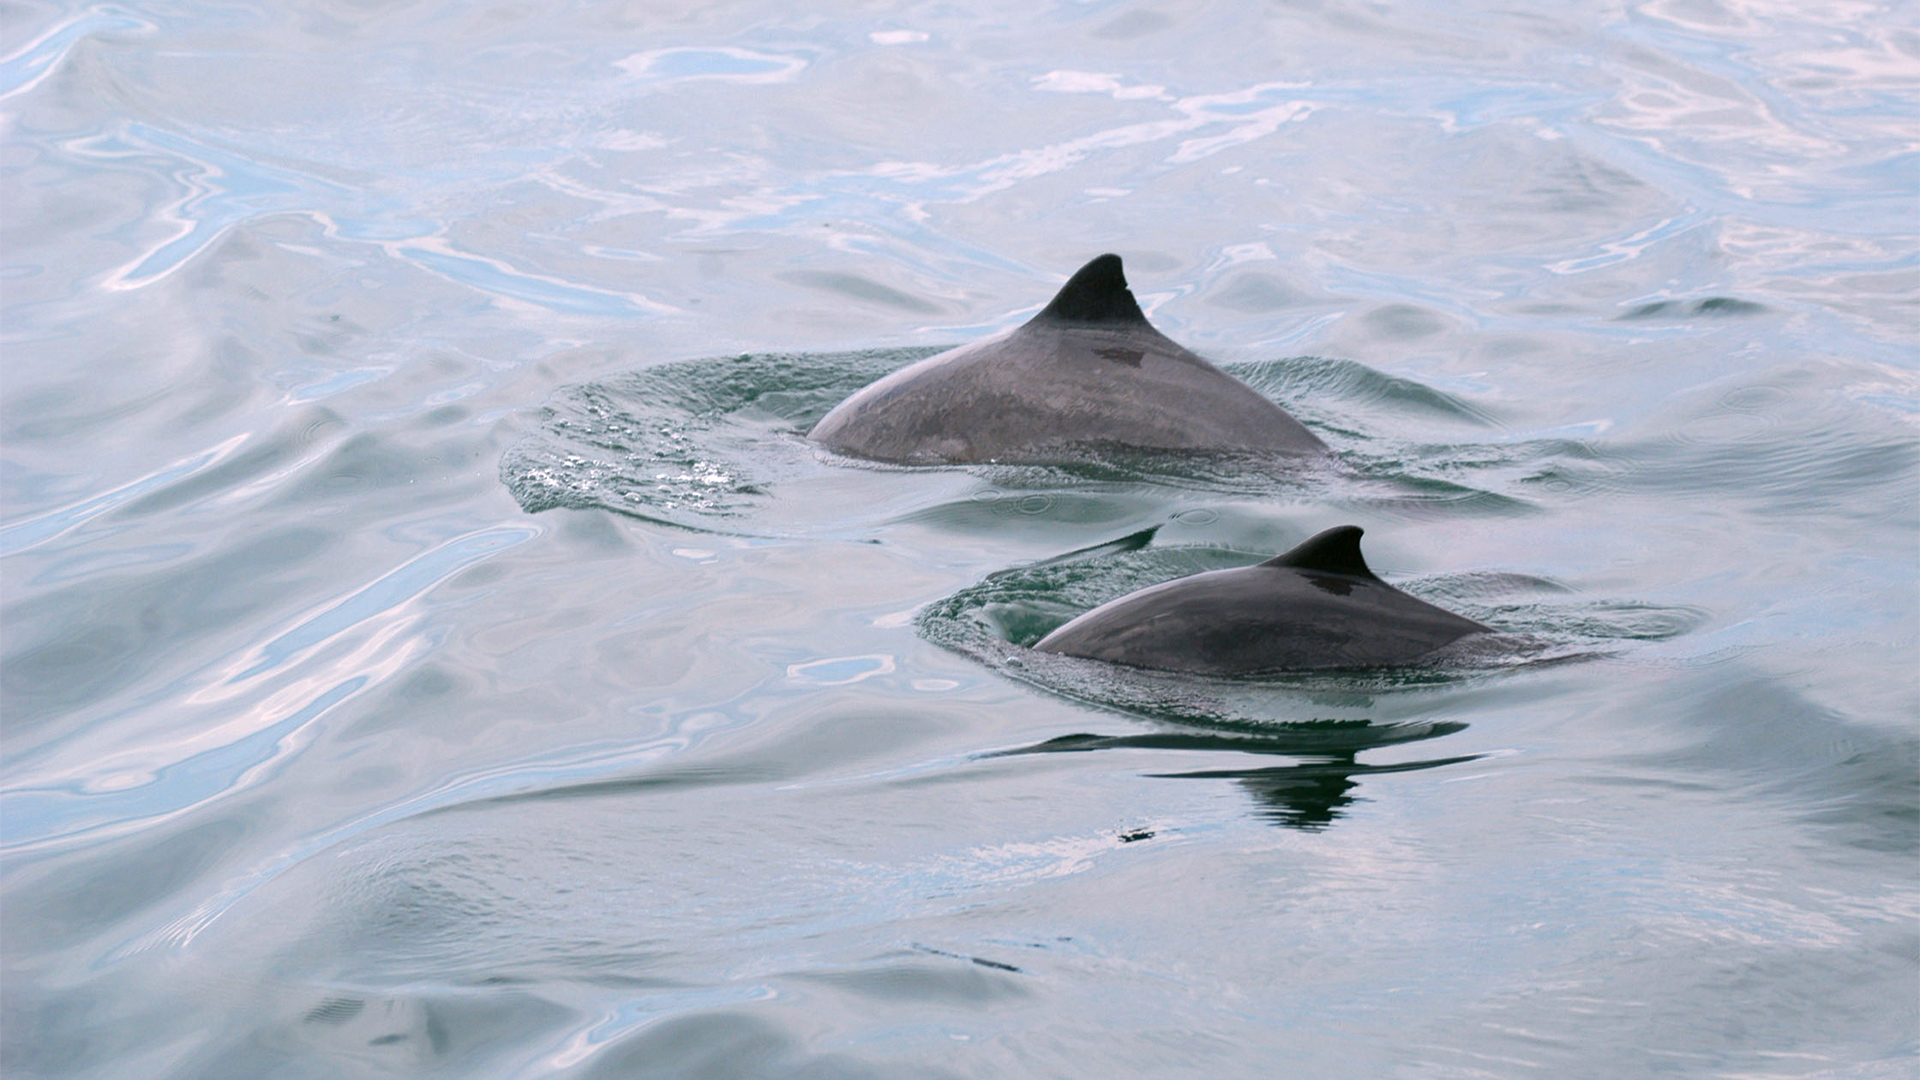 Two porpoise backs with their triangular fins are visible on the water surface. The porpoise in the foreground is smaller than the one behind it.